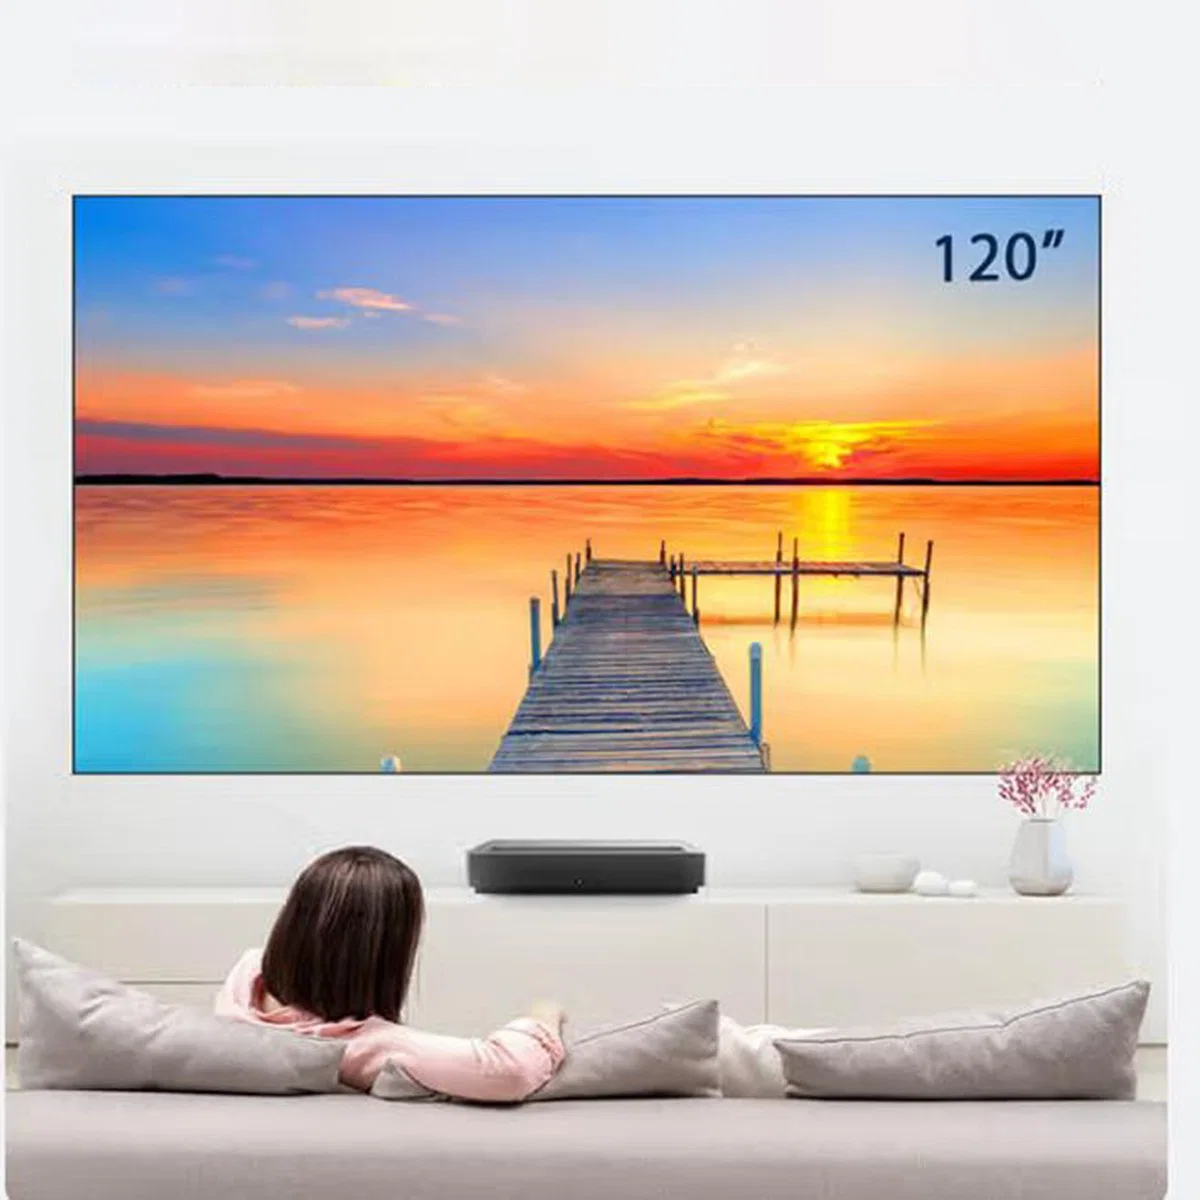 Fscreen 120 Inch Fresnel Fixed Frame Ambient Light Rejection Projector Screen for Home Theater Laser TV Screen Daylight Projection Screen 4K Triple Laser